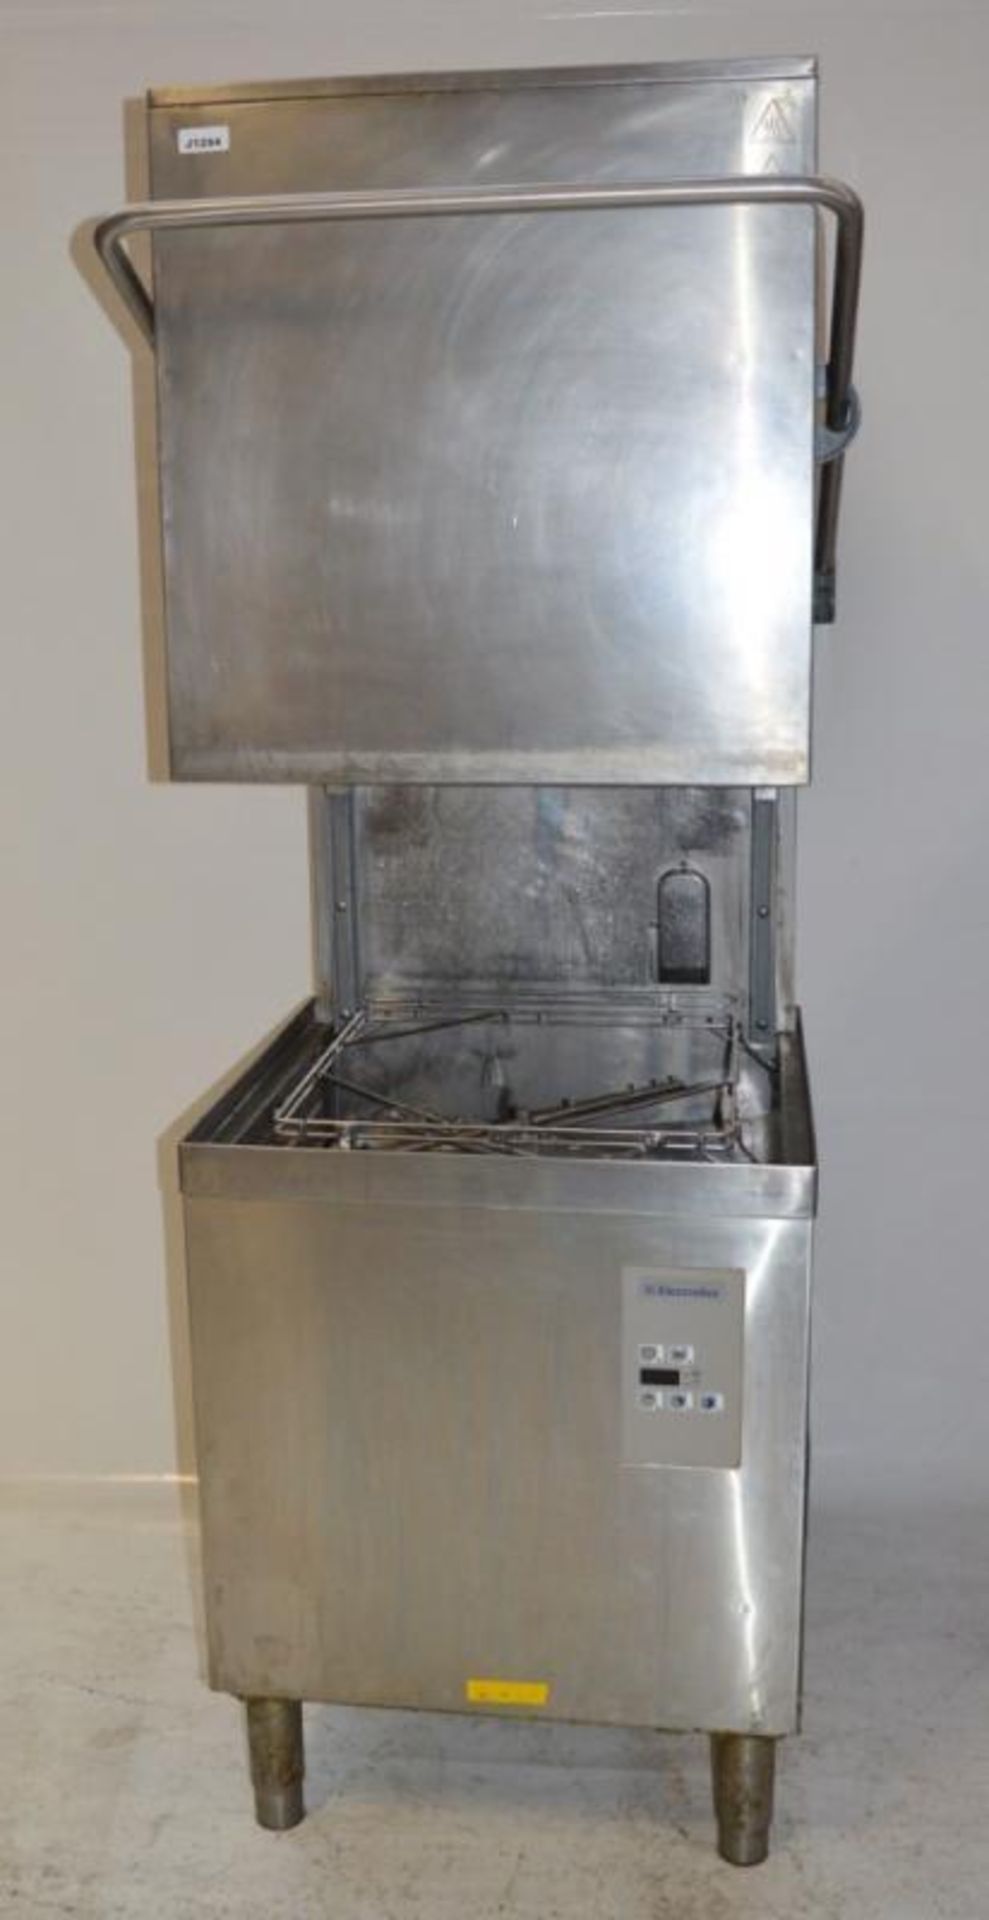 1 x Electrolux NHTG Stainless Steel Passthrough Dishwasher With Brightwell D1 Automatic Dosing Pump - Image 8 of 13